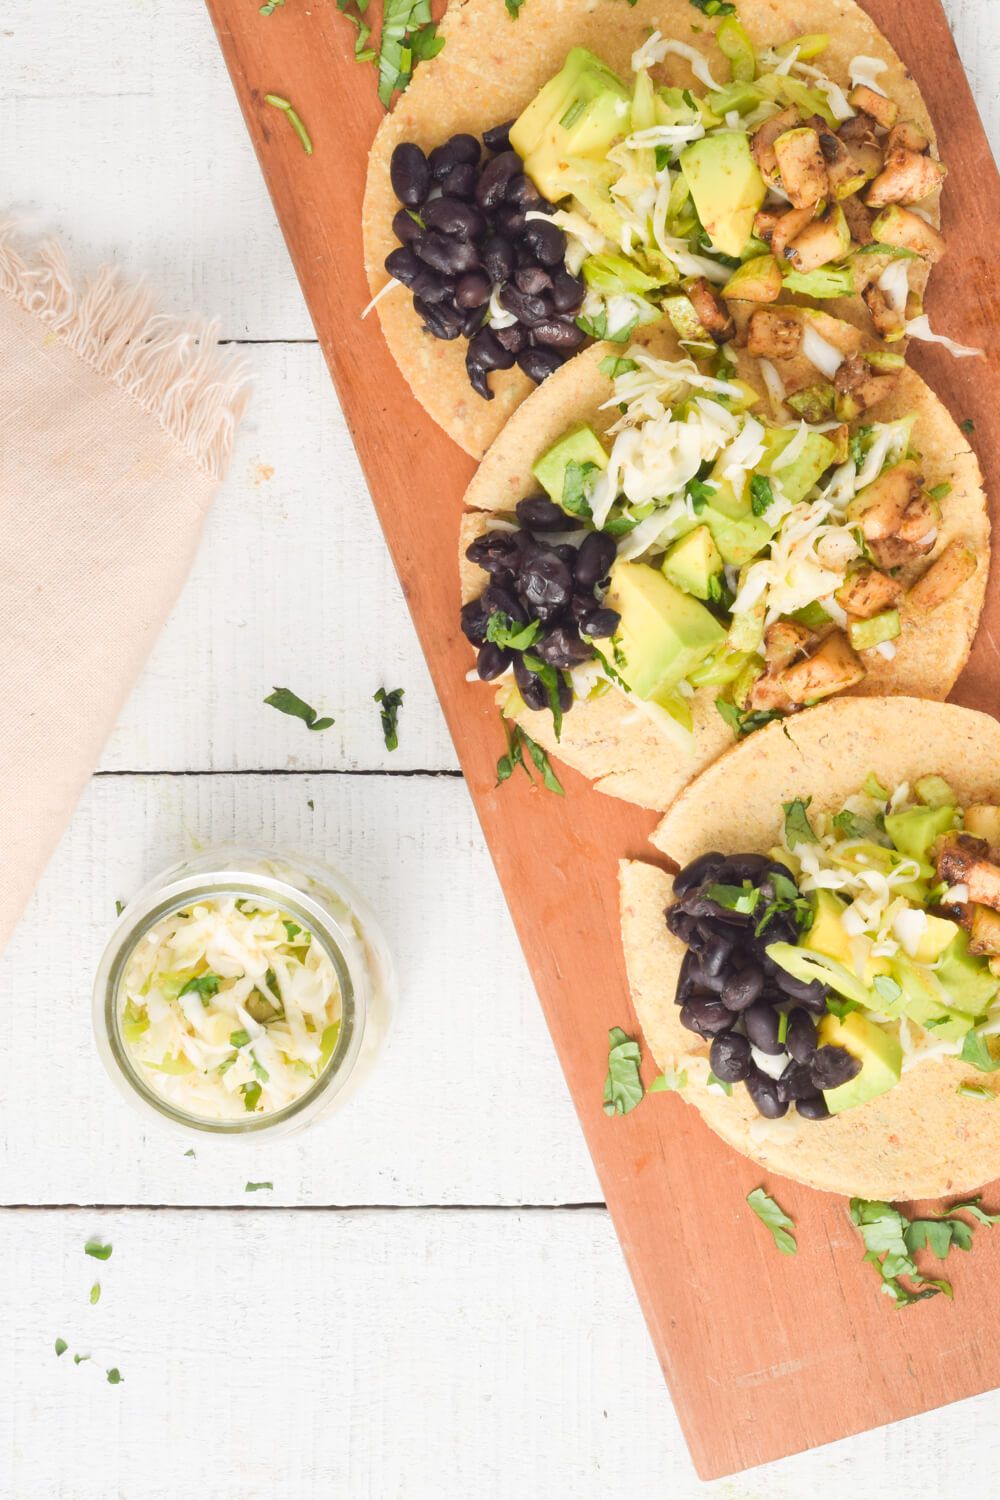 Three vegetarian black bean and zucchini tacos with cabbage slaw and avocado.